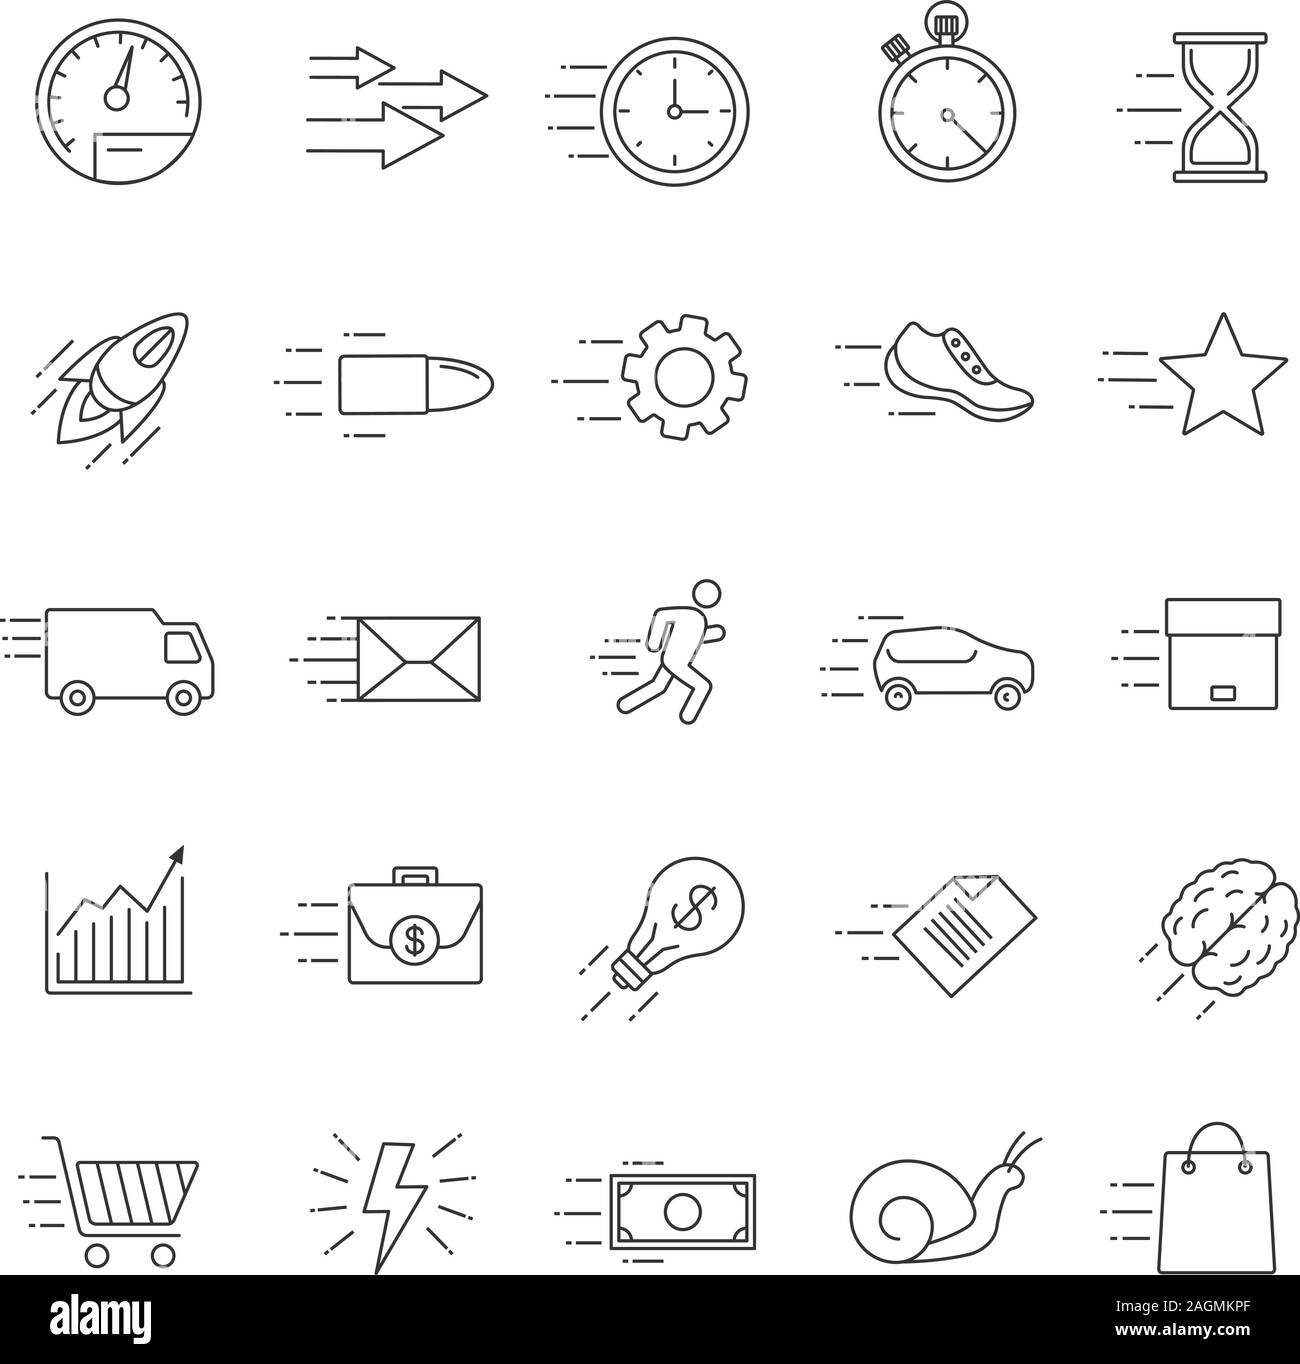 https://c8.alamy.com/comp/2AGMKPF/motion-linear-icons-set-speed-flying-items-fast-services-thin-line-contour-symbols-isolated-vector-outline-illustrations-2AGMKPF.jpg